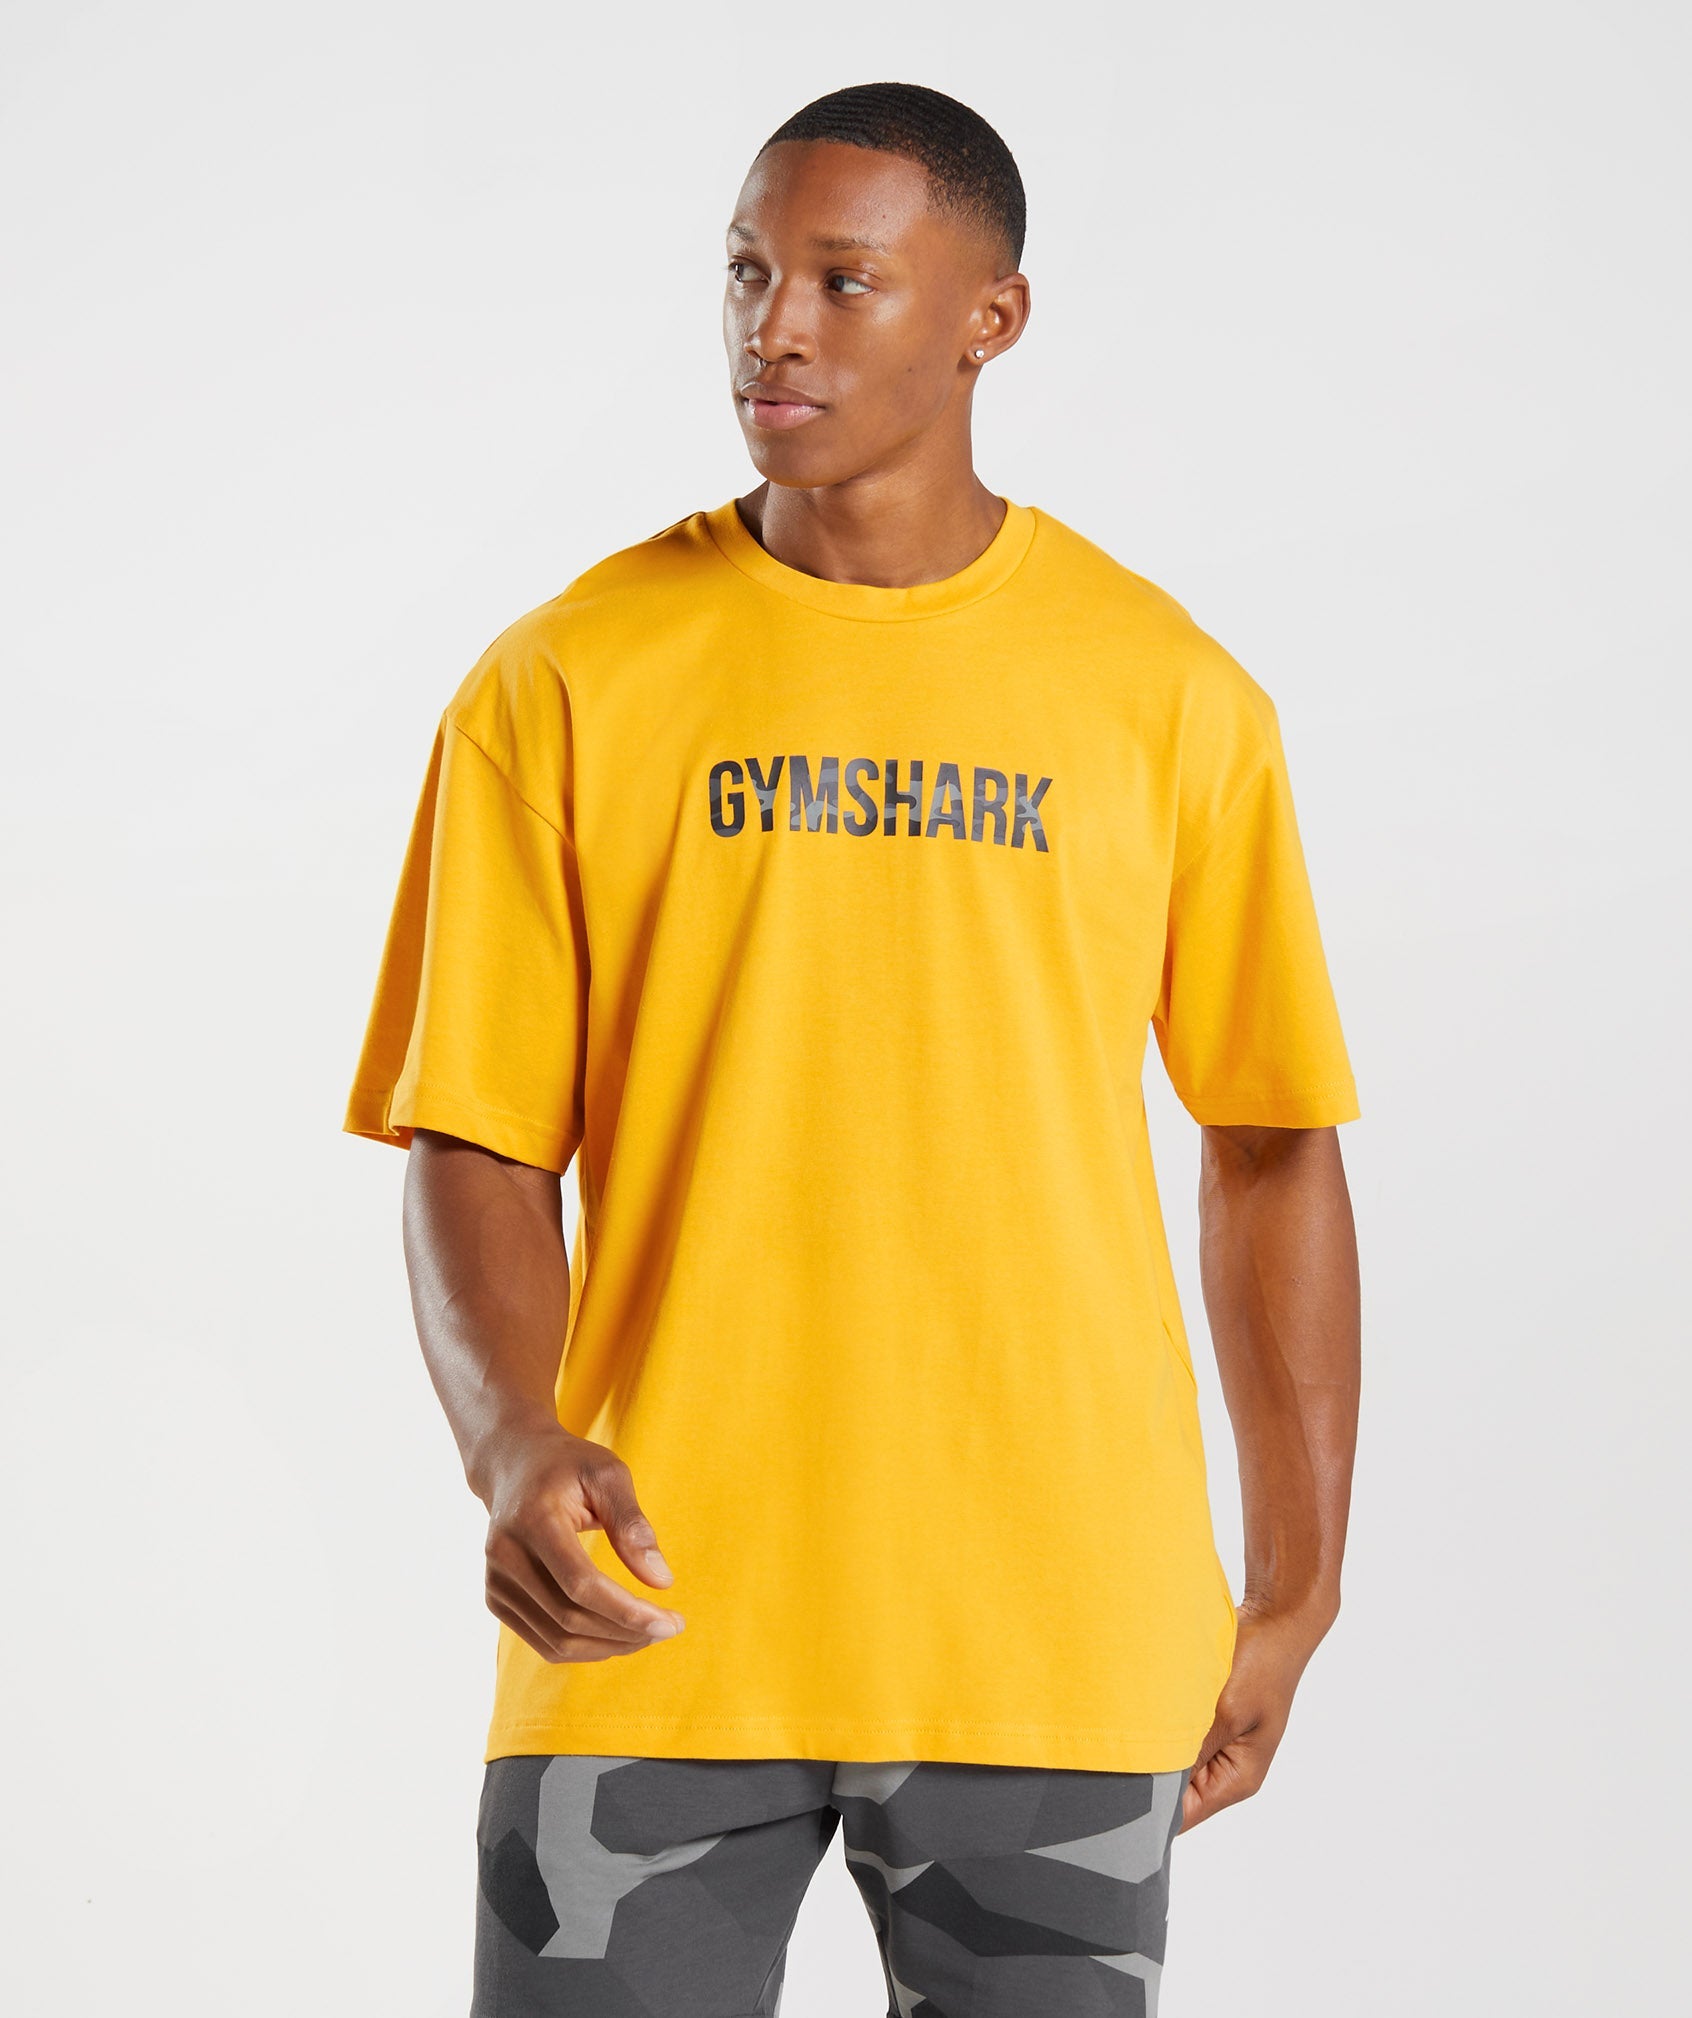 Apollo Infill Oversized T-Shirt in Saffron Yellow - view 1